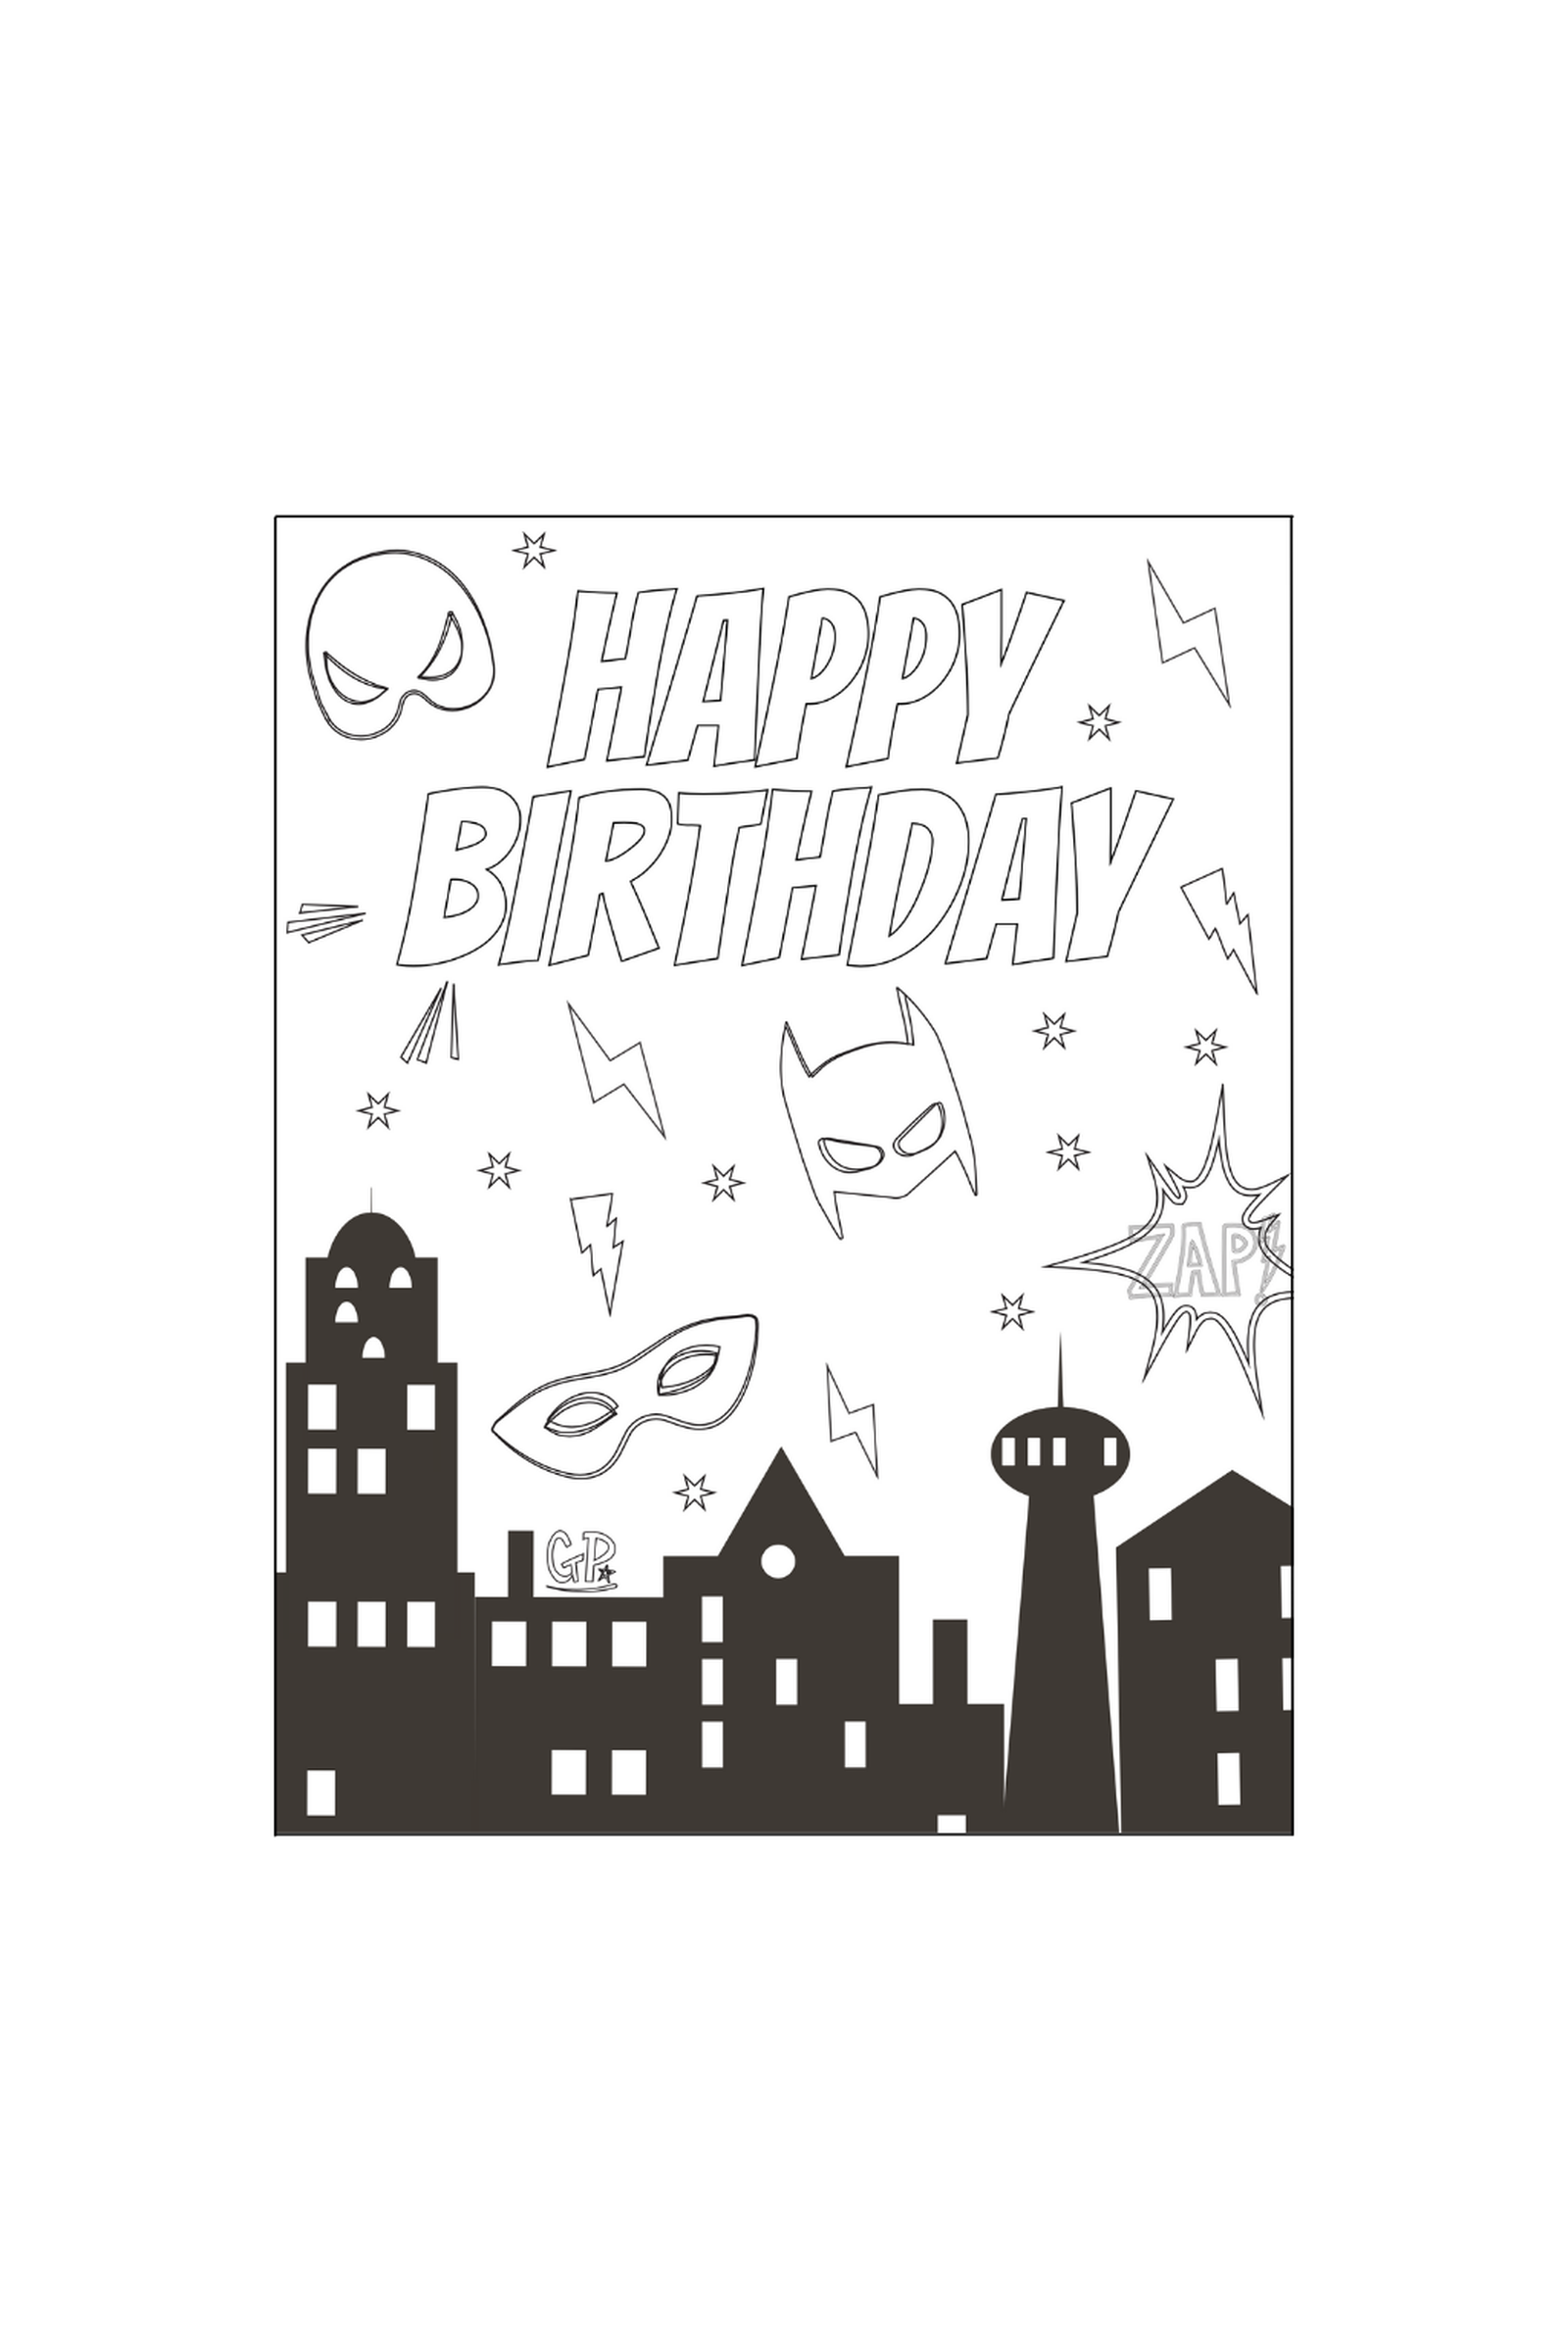 happy birthday cards for boys to color